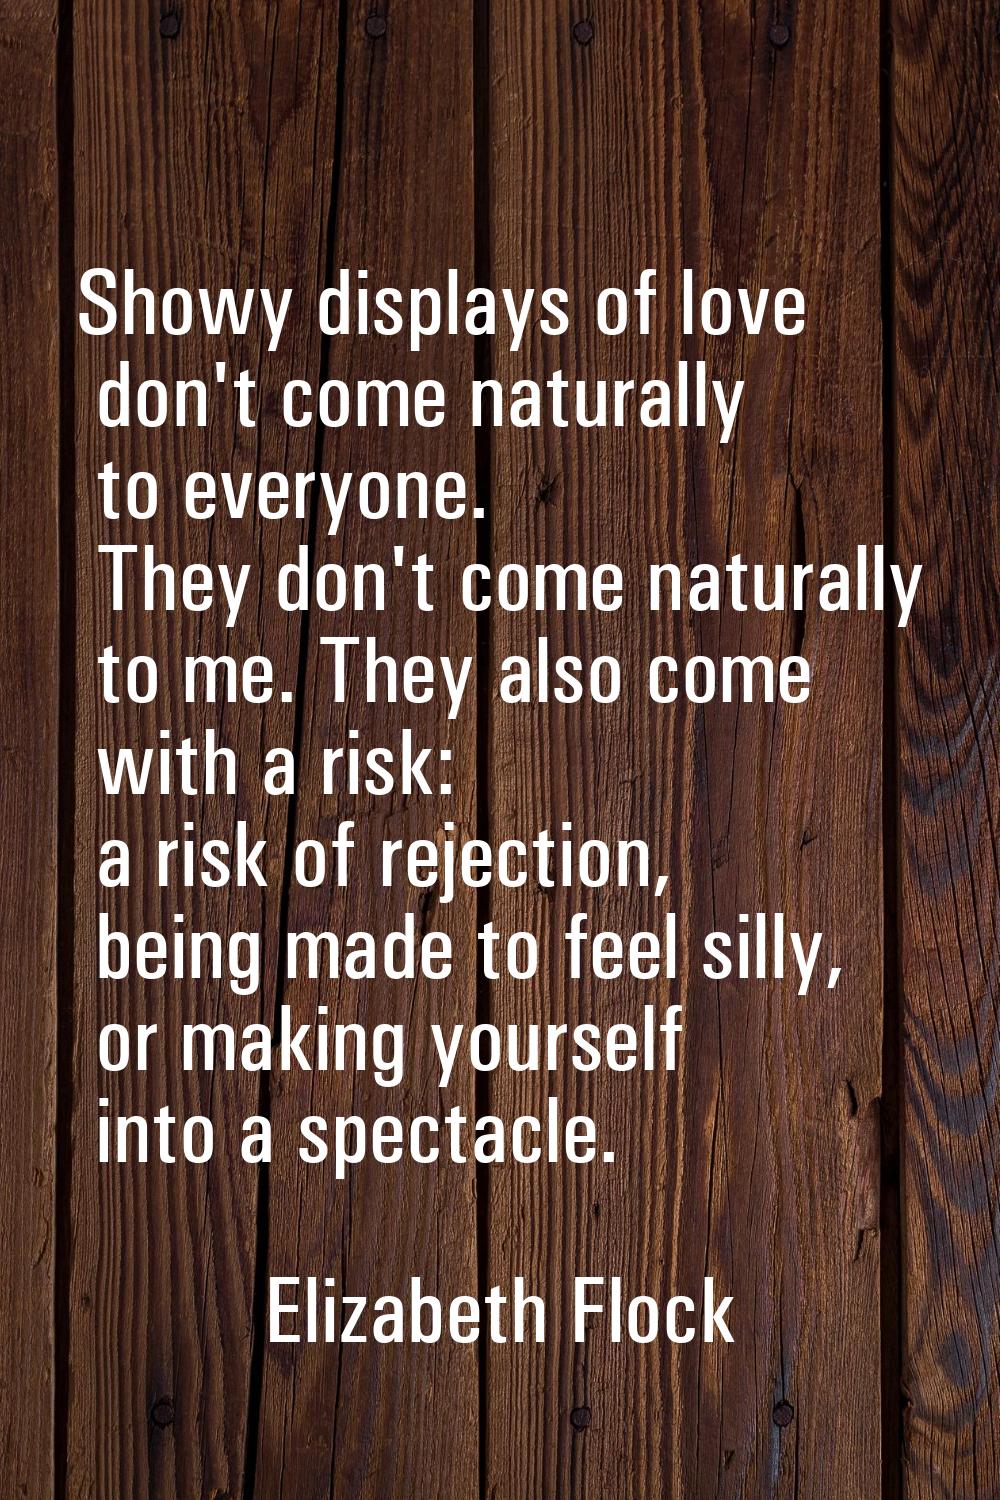 Showy displays of love don't come naturally to everyone. They don't come naturally to me. They also